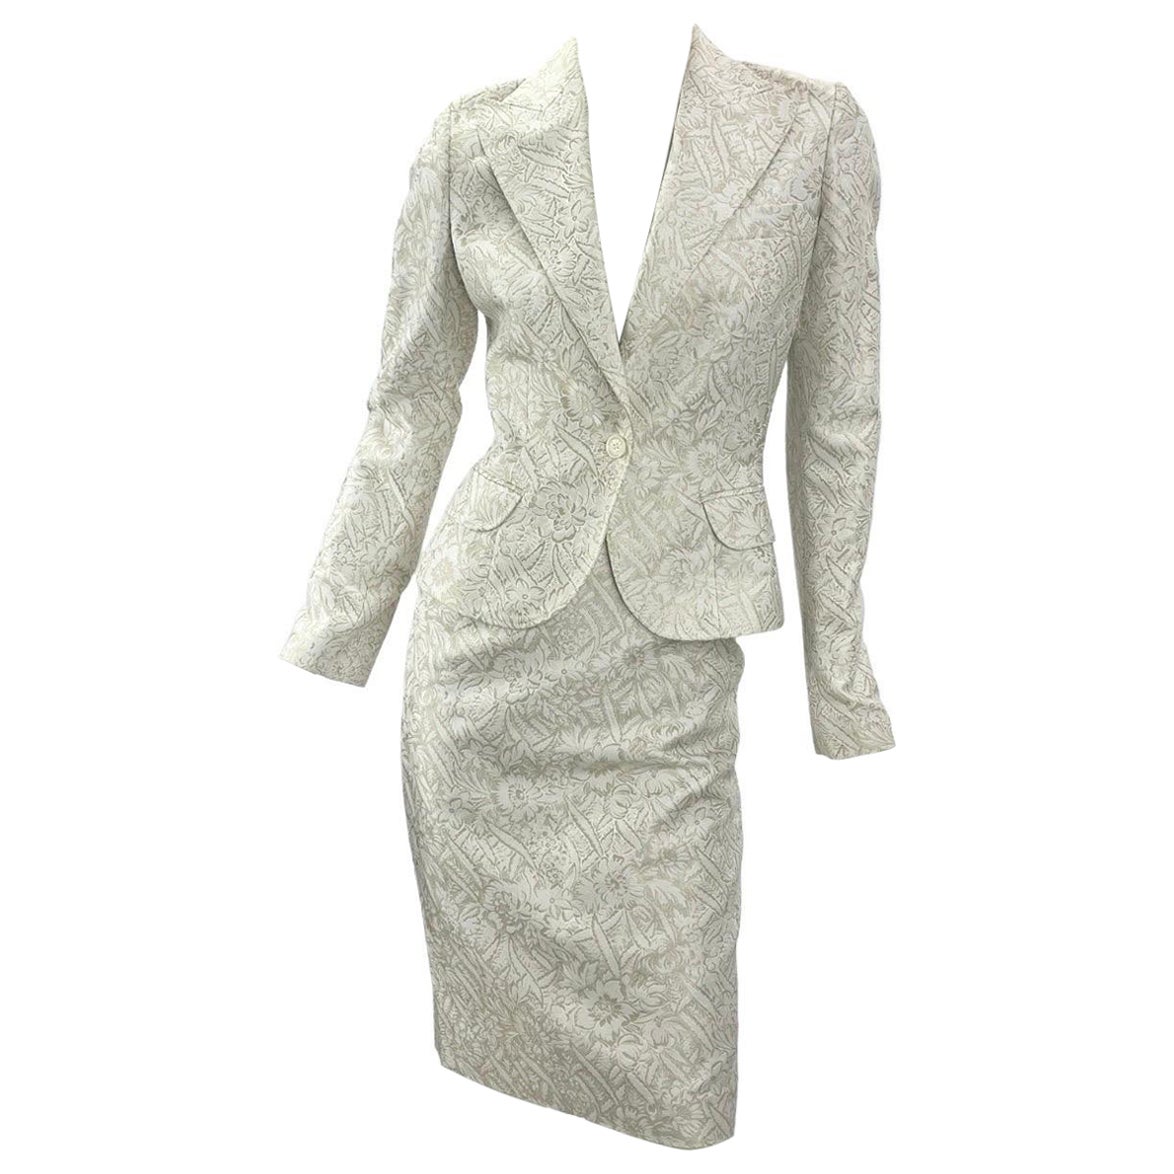 Early 2000-s Vintage Dolce & Gabbana White Gold Floral Jacquard Skirt Suit   For Sale